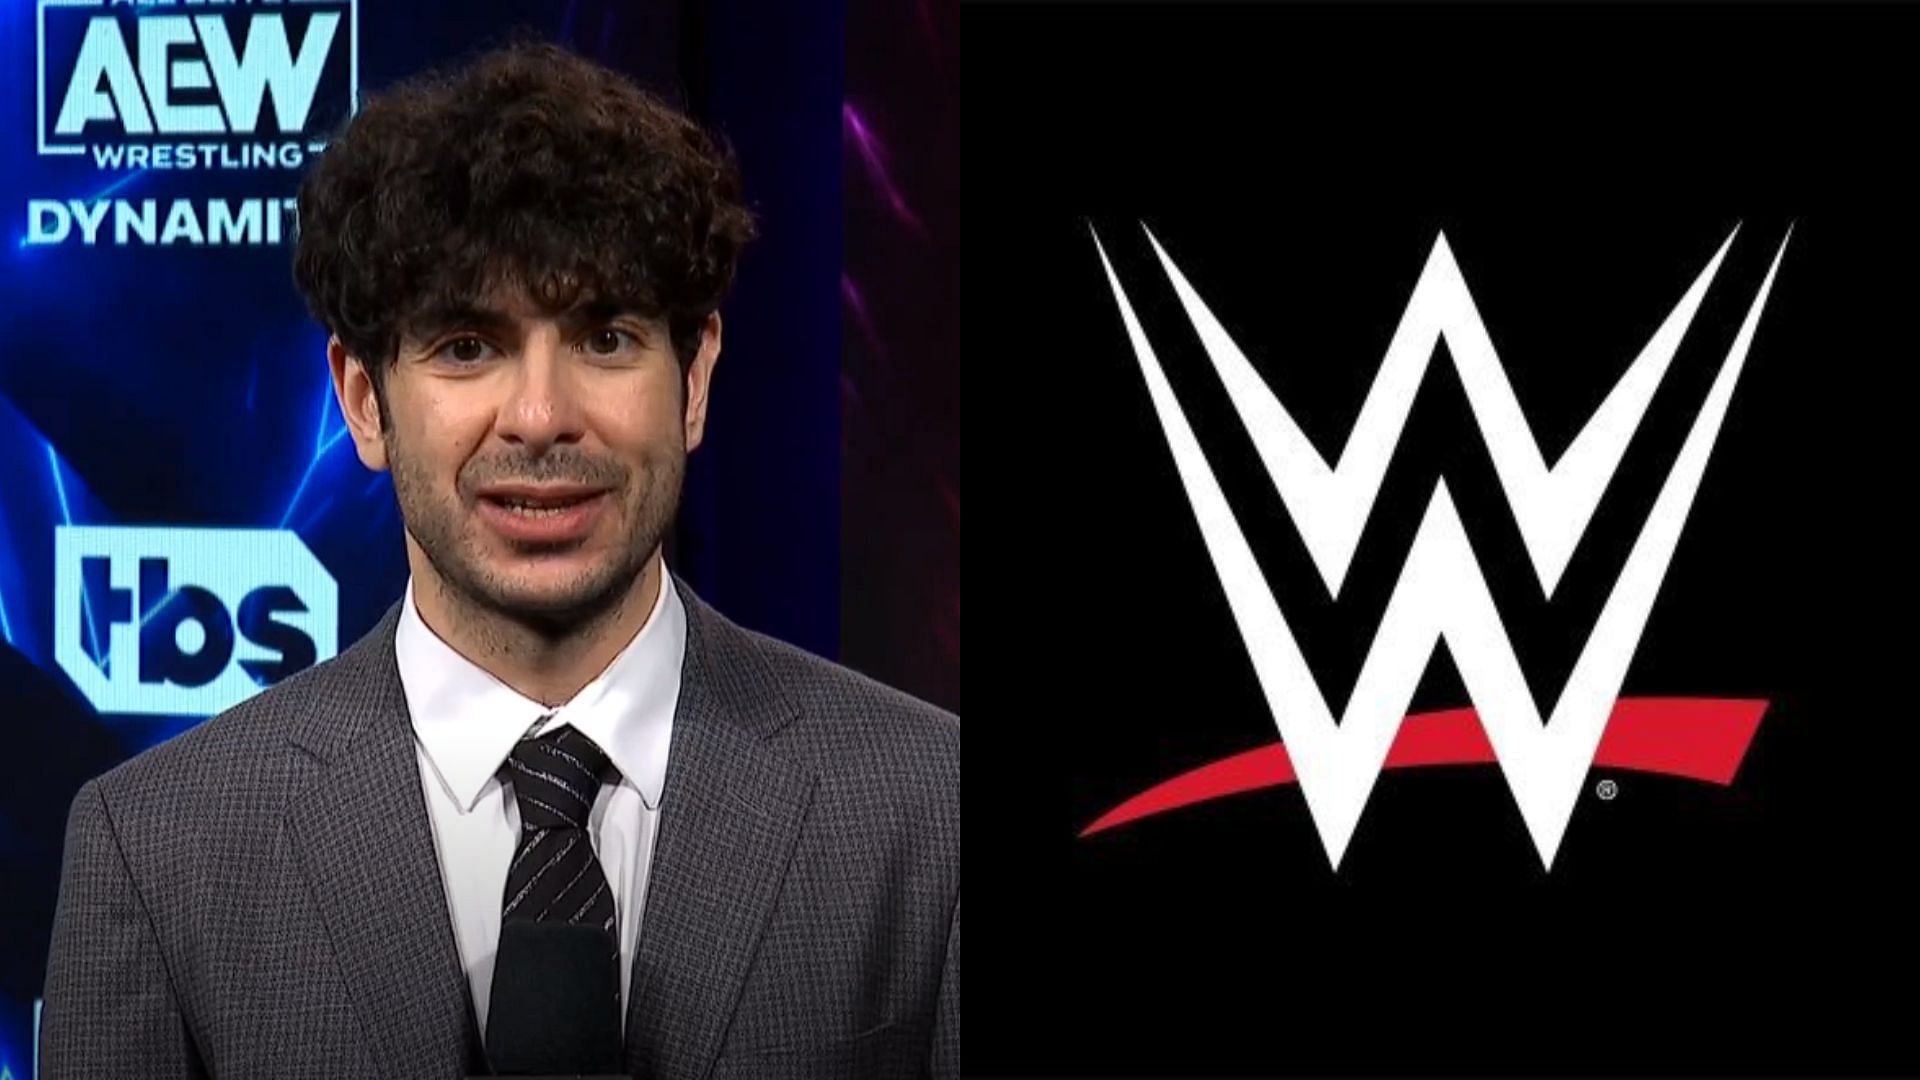 Tony Khan is the president of All Elite Wrestling [Photos courtesy of AEW and WWE Official Twitter Accounts respectively]